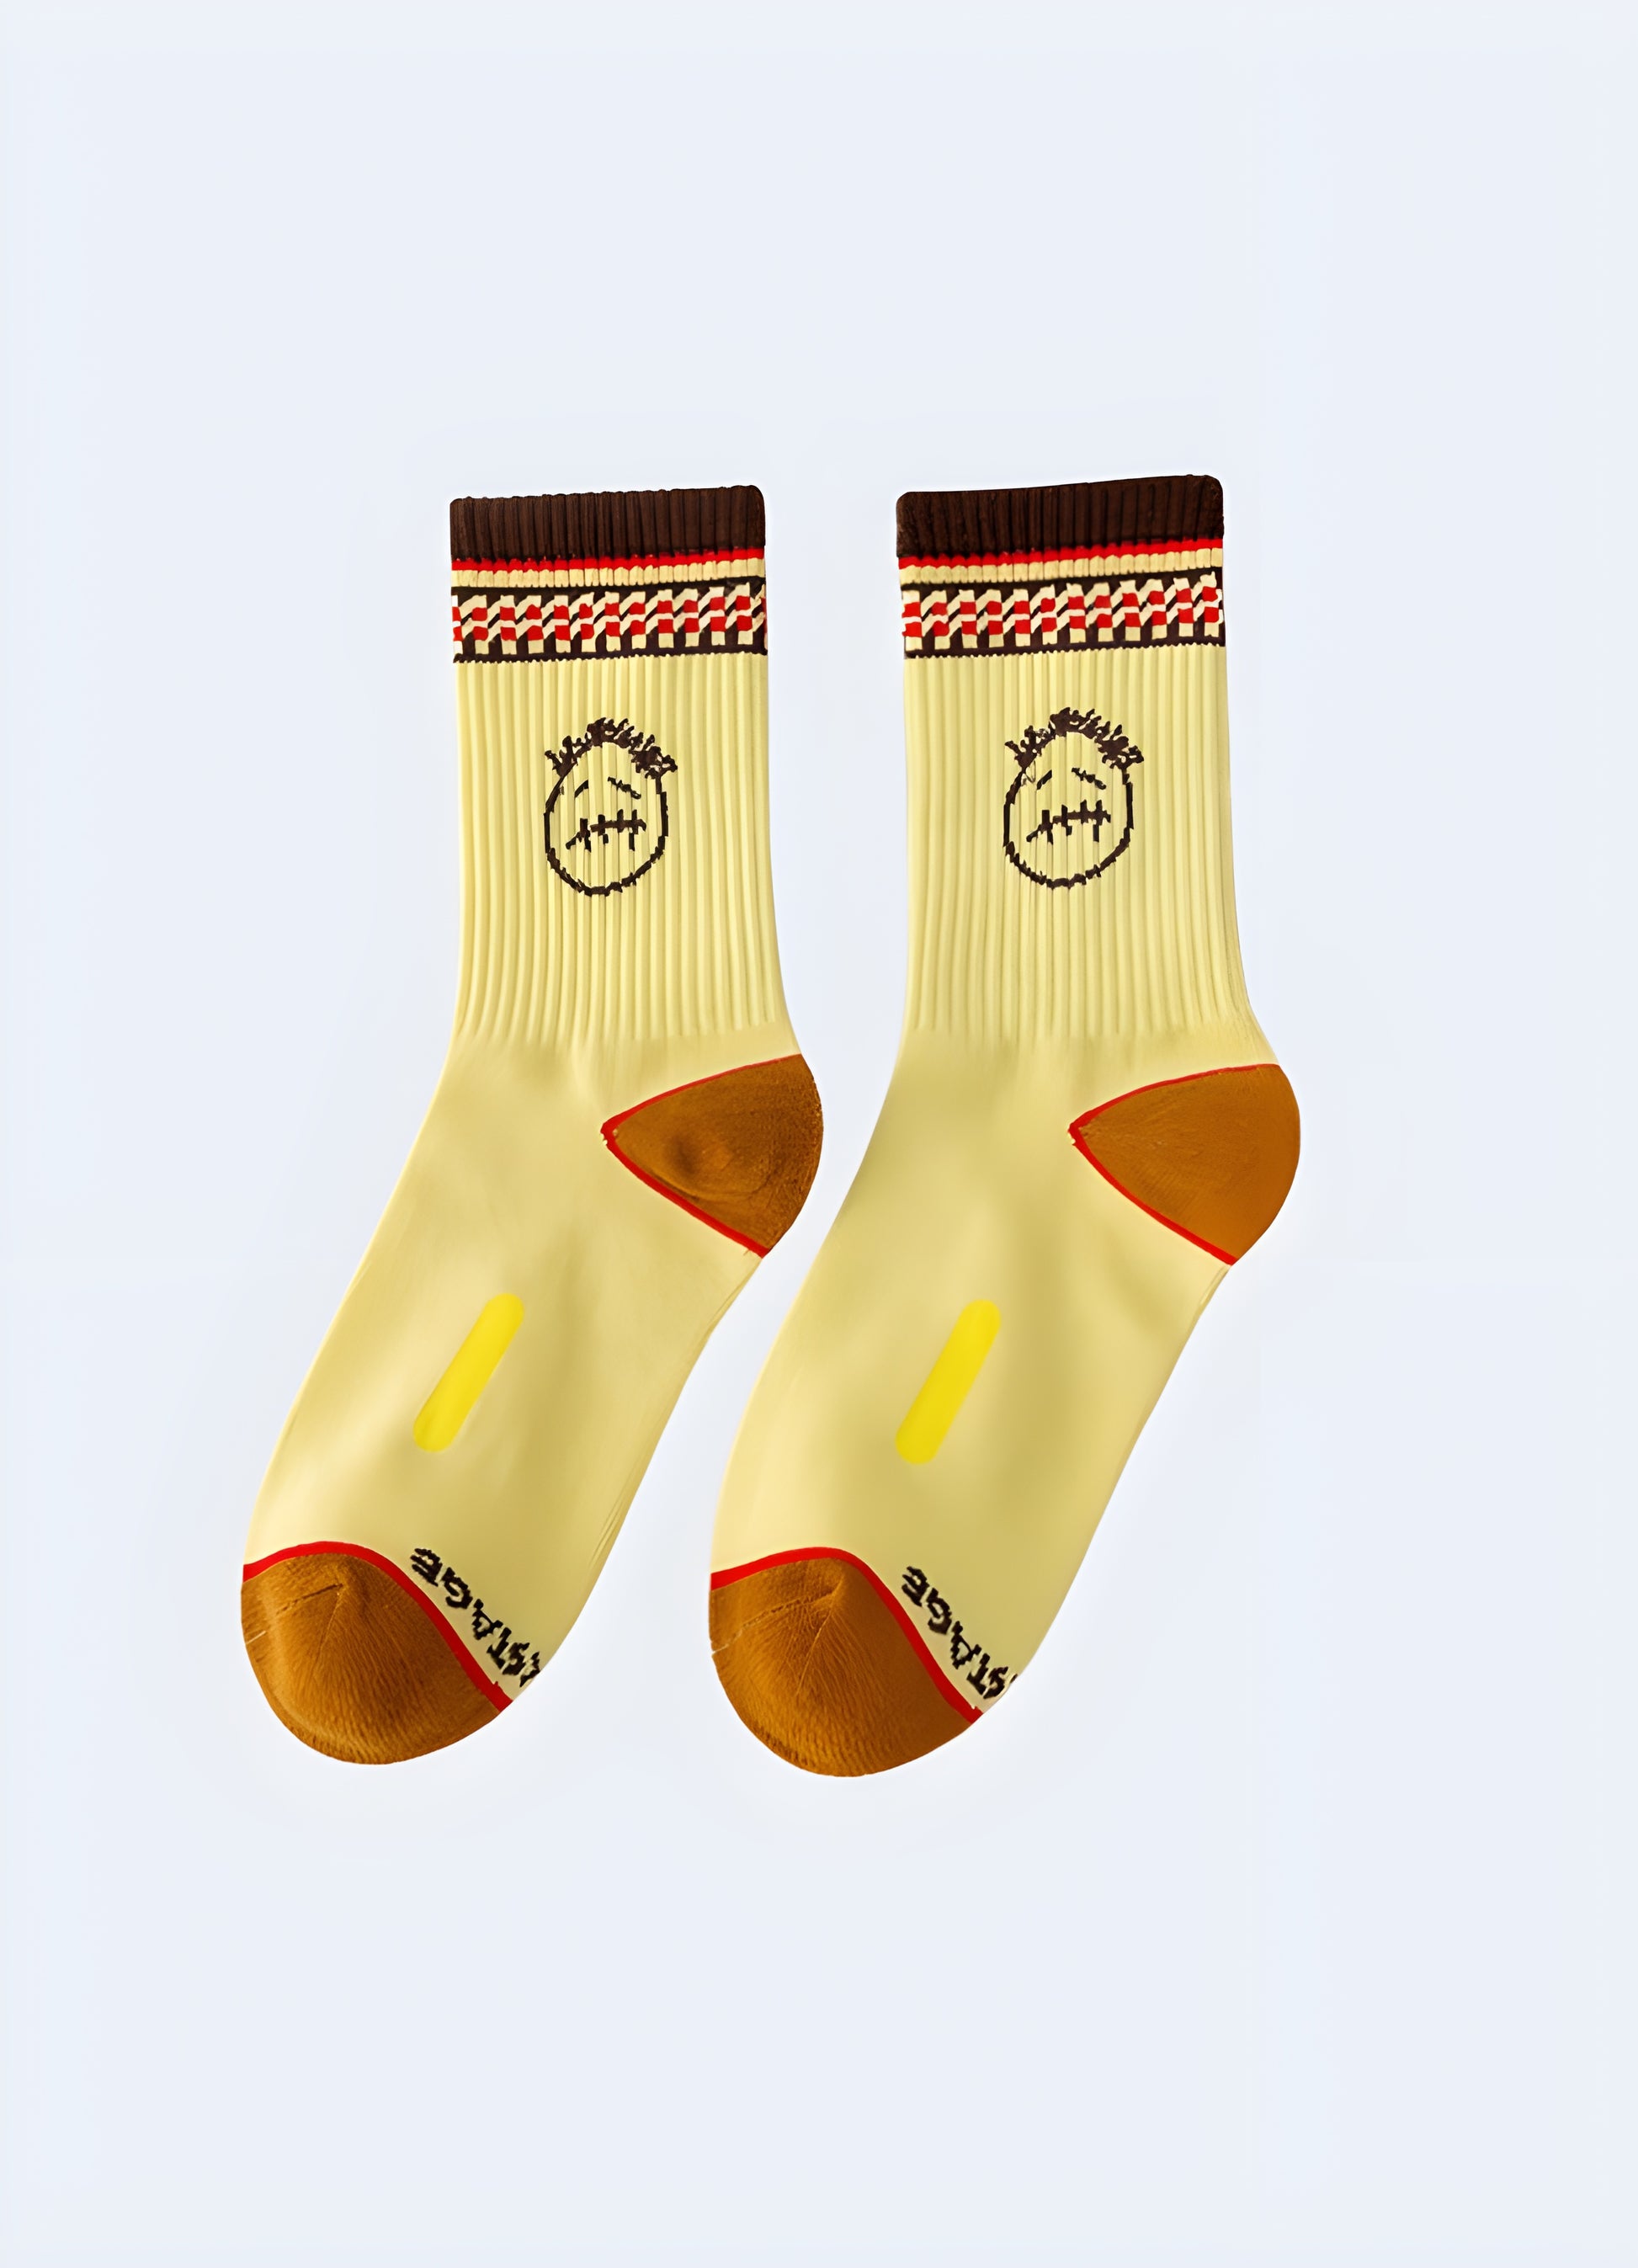 Channel your inner movie marathon master with these cozy sad face socks.